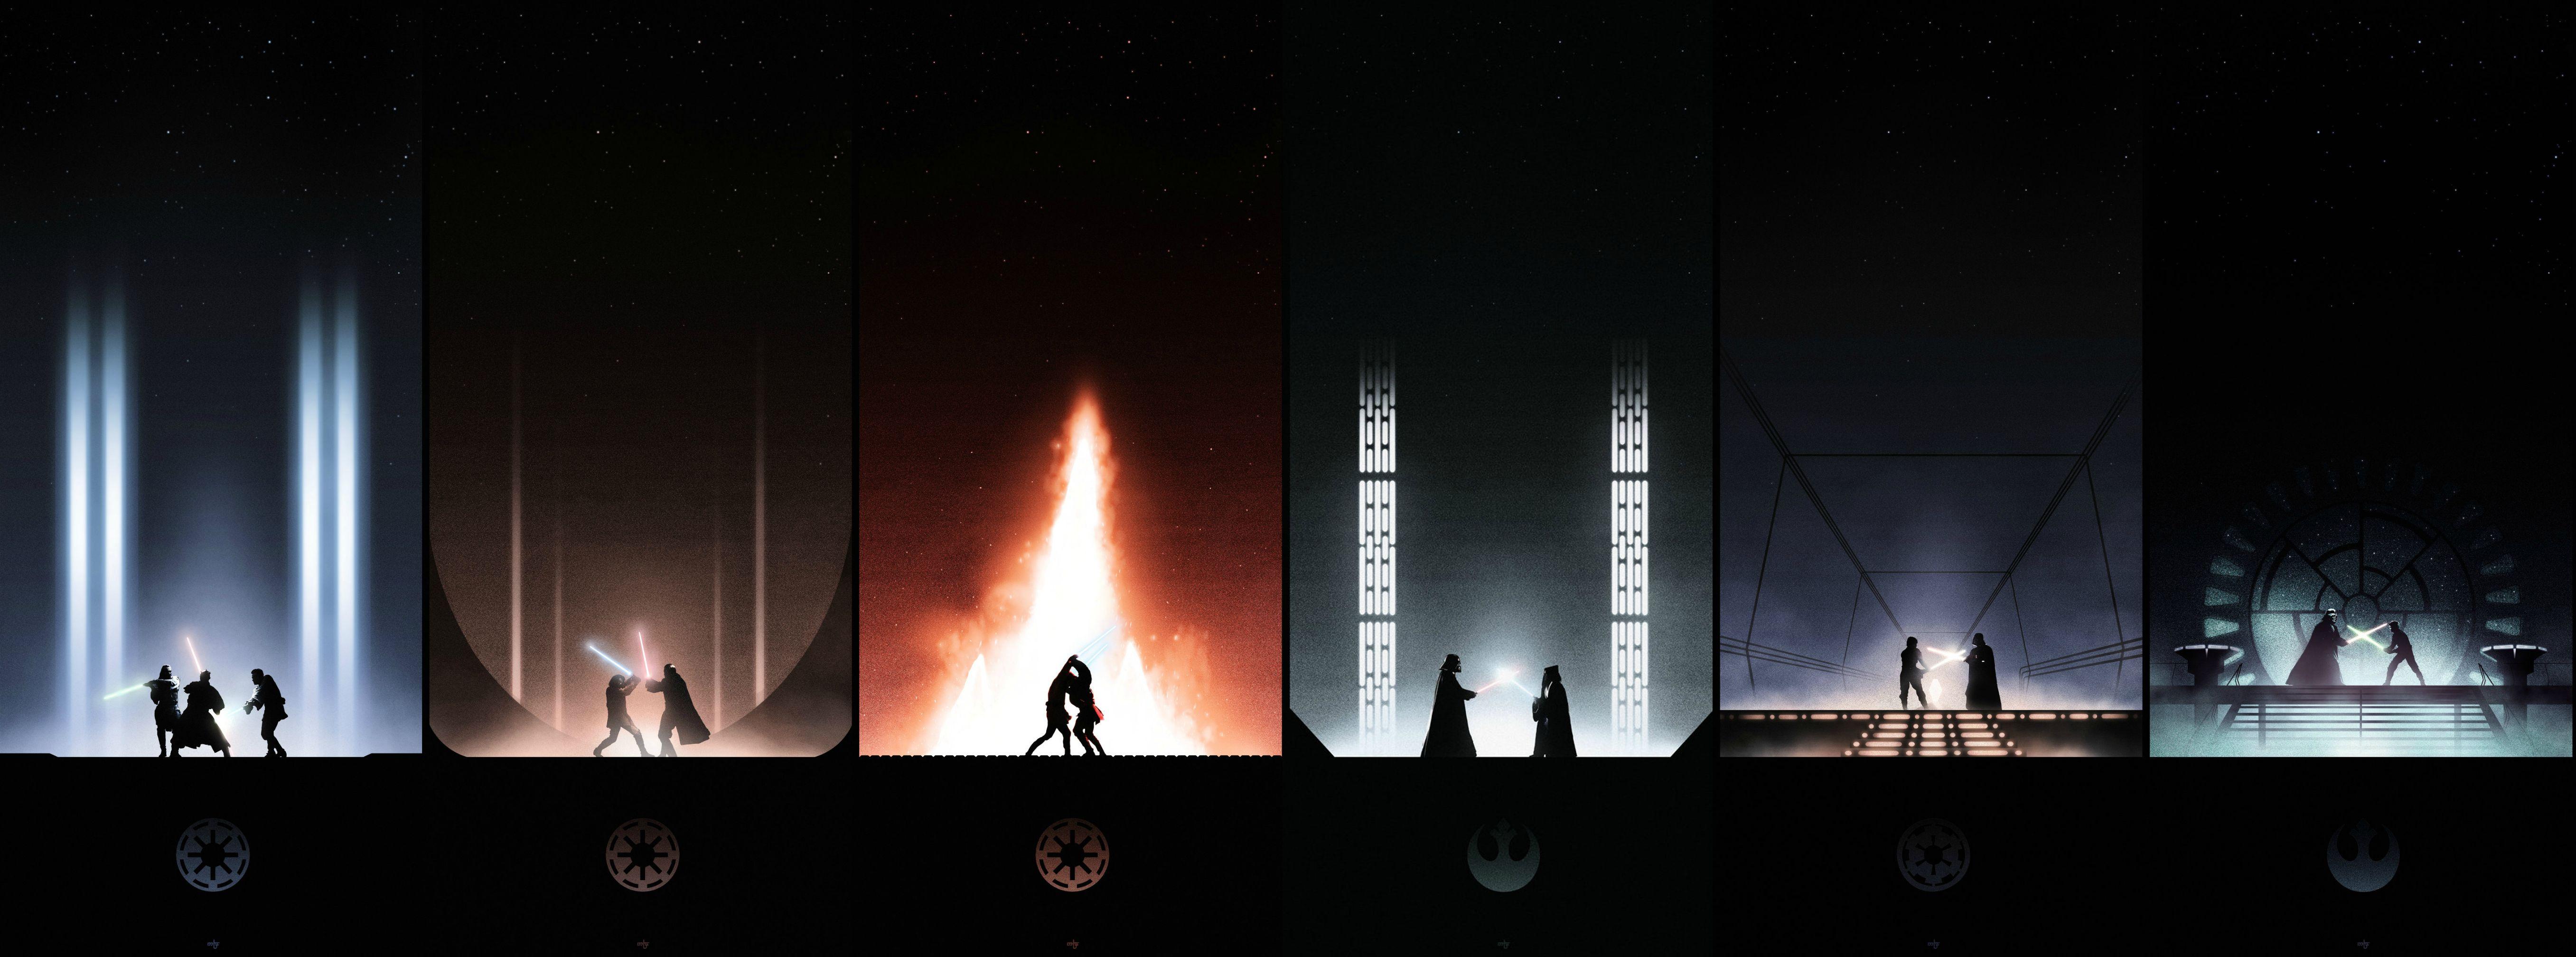 Recently created this series of posters featuring the lightsaber